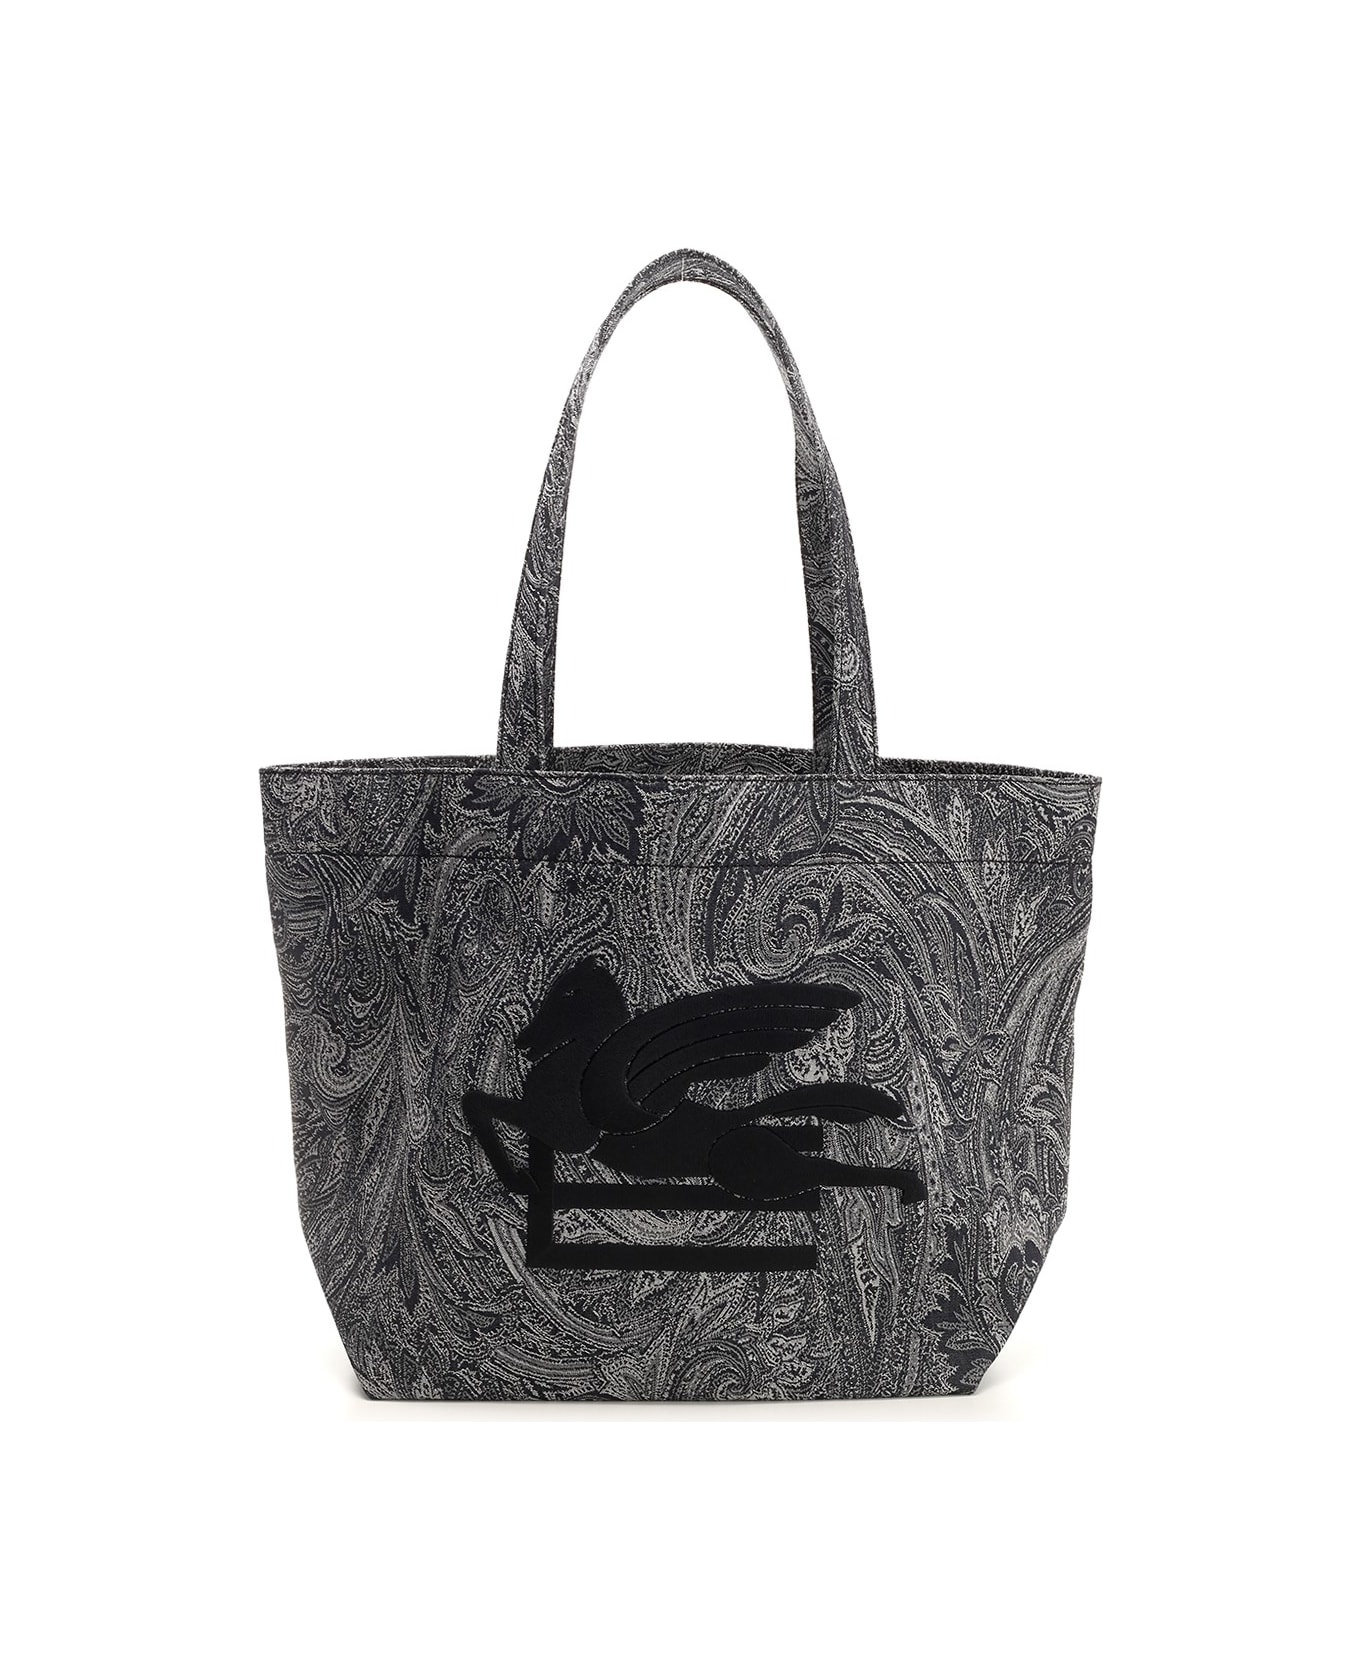 Navy Blue Large Tote Bag With Paisley Jacquard Motif - 1